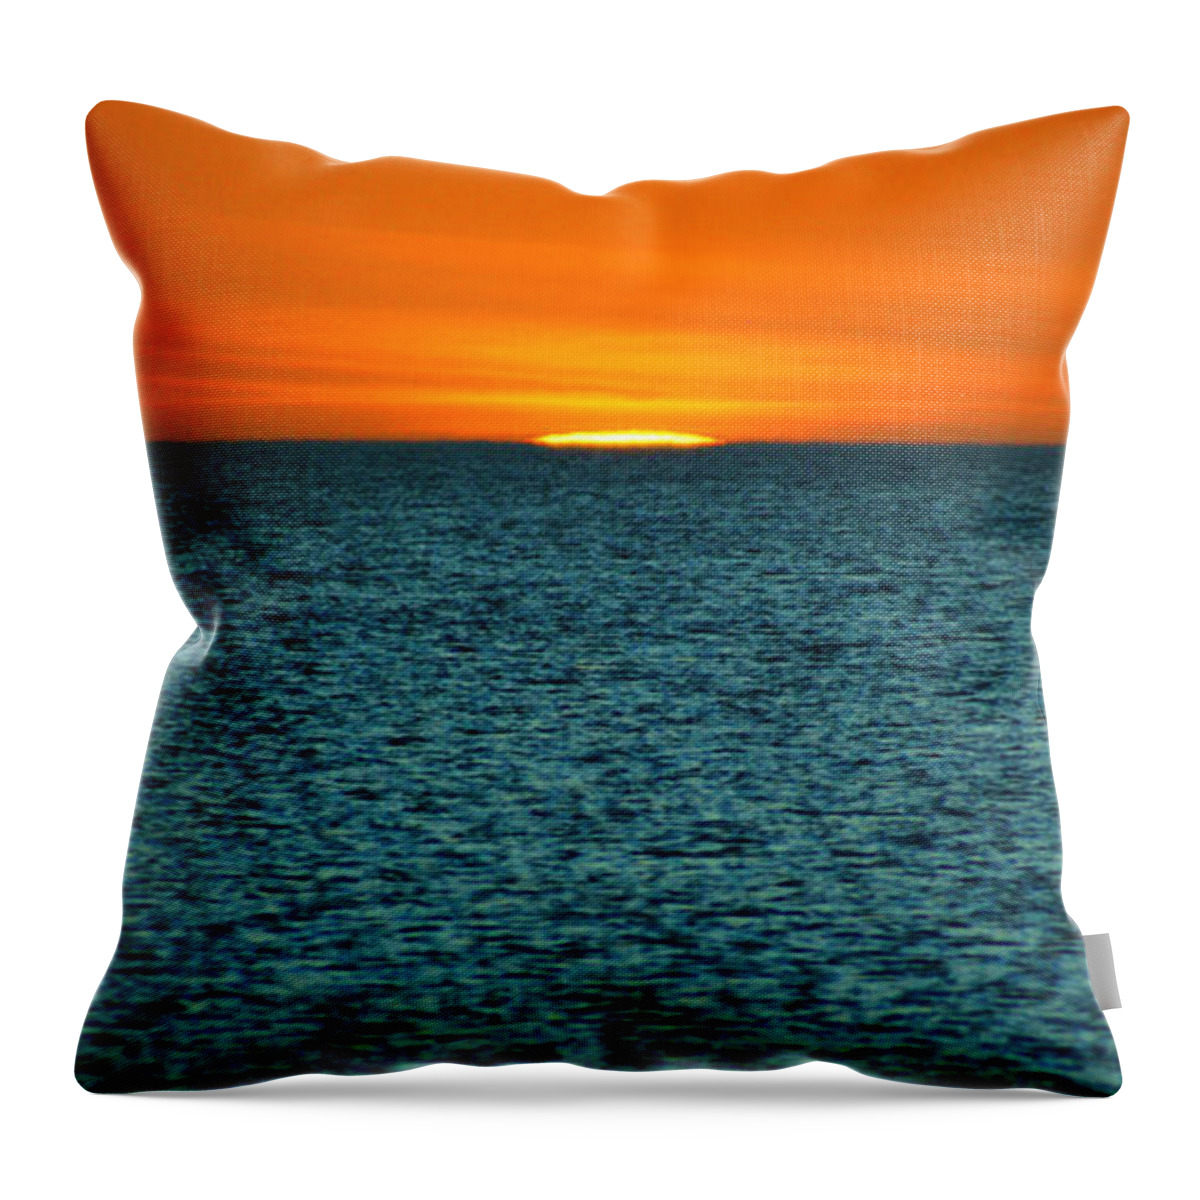 Sunset Throw Pillow featuring the photograph Just A Sliver by Anthony Wilkening